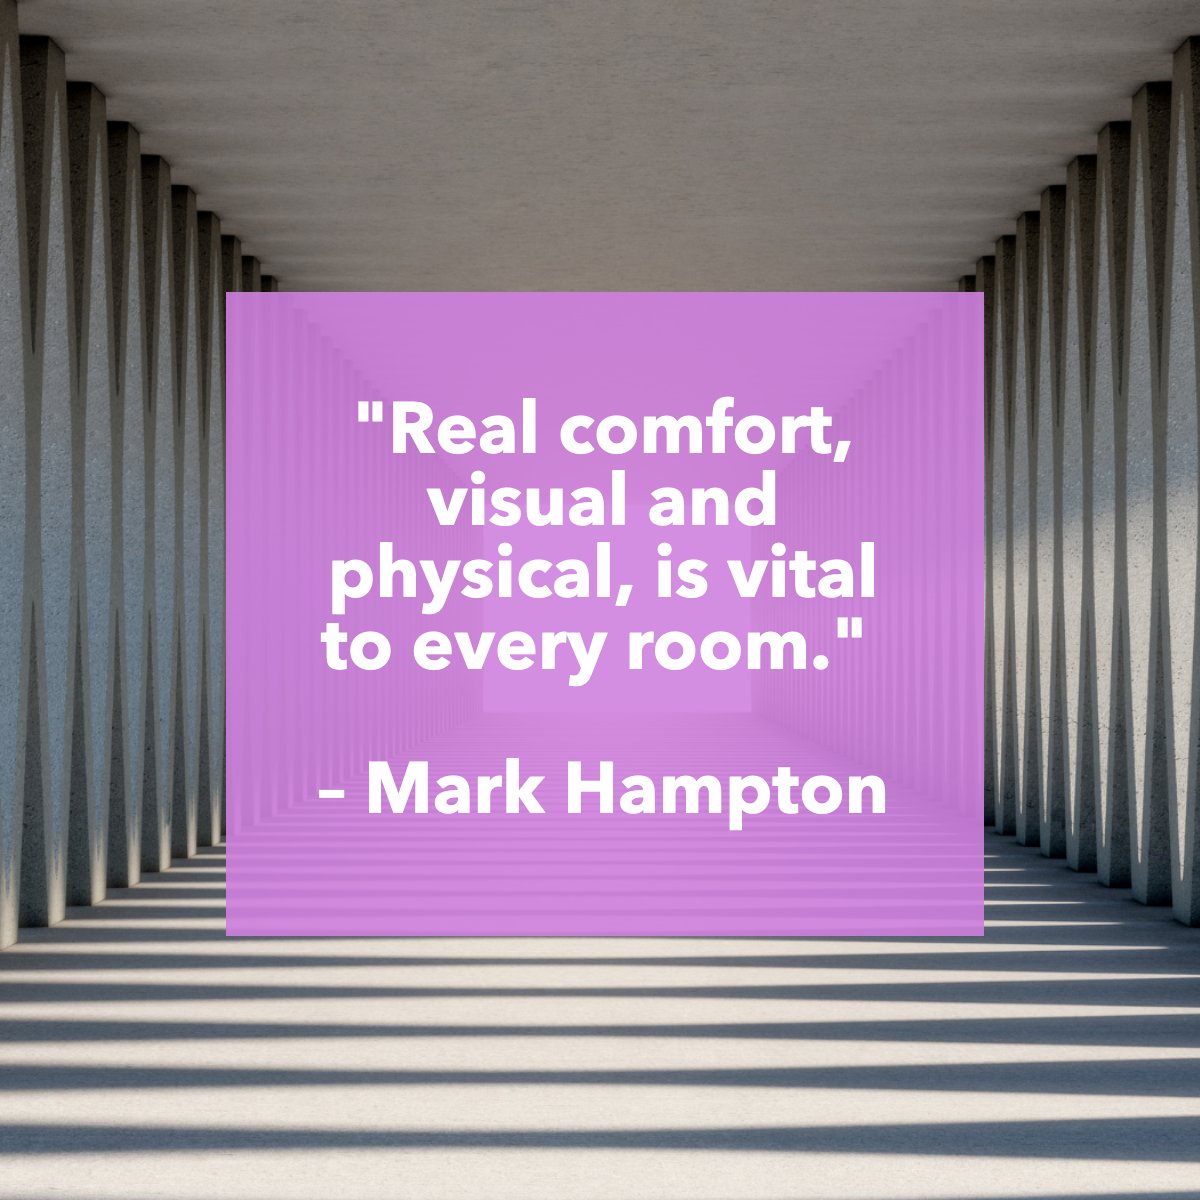 'Real comfort, visual and physical, is vital to every room.'
― Mark Hampton 📖

#quote #quoteoftheday #comfort #design #interiordesign #architecture 
 #eastvalerealtor #eastvalerealestate #eastvale #chinohillsrealtor #chinohillsrealestate #chinorealtor